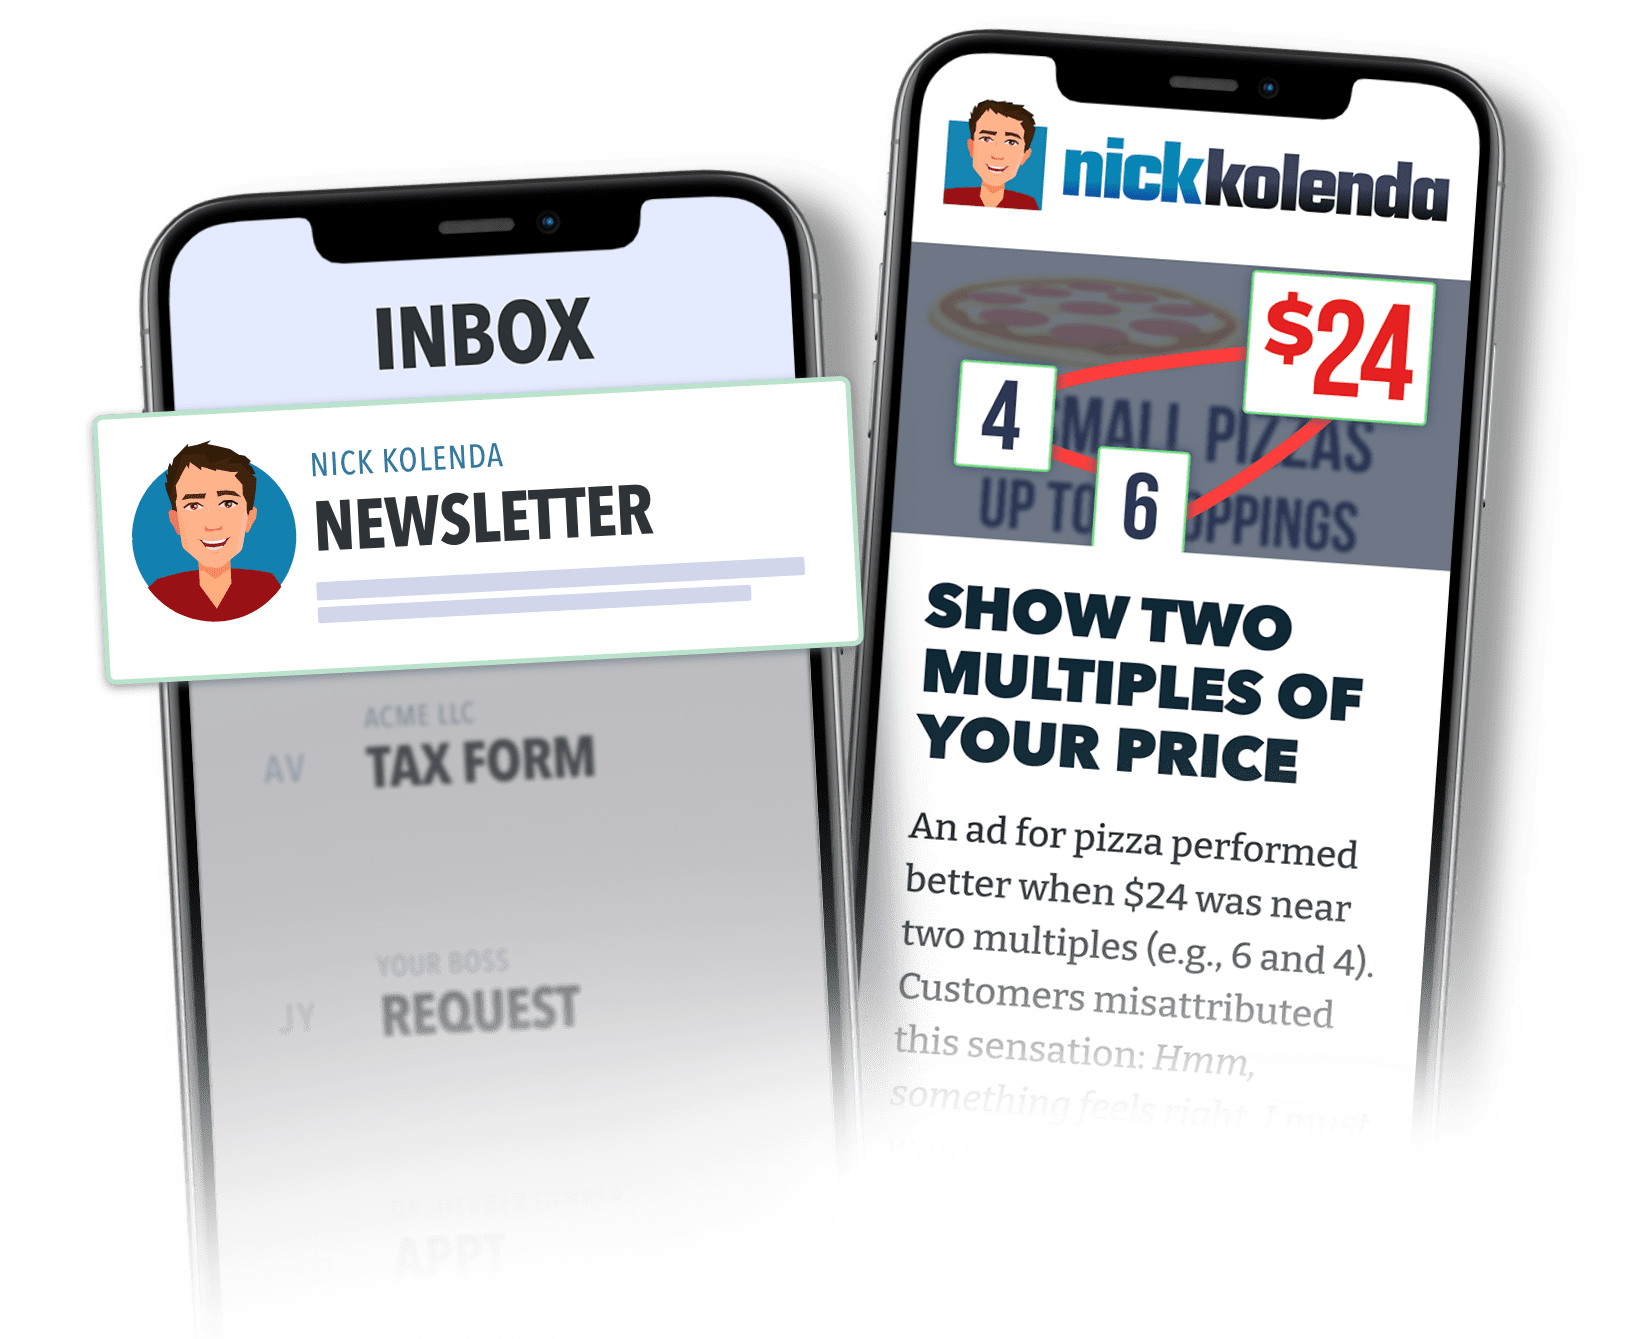 Cell phone showing email inbox with Nick Kolenda's newsletter, along with an example newsletter that seems super interesting